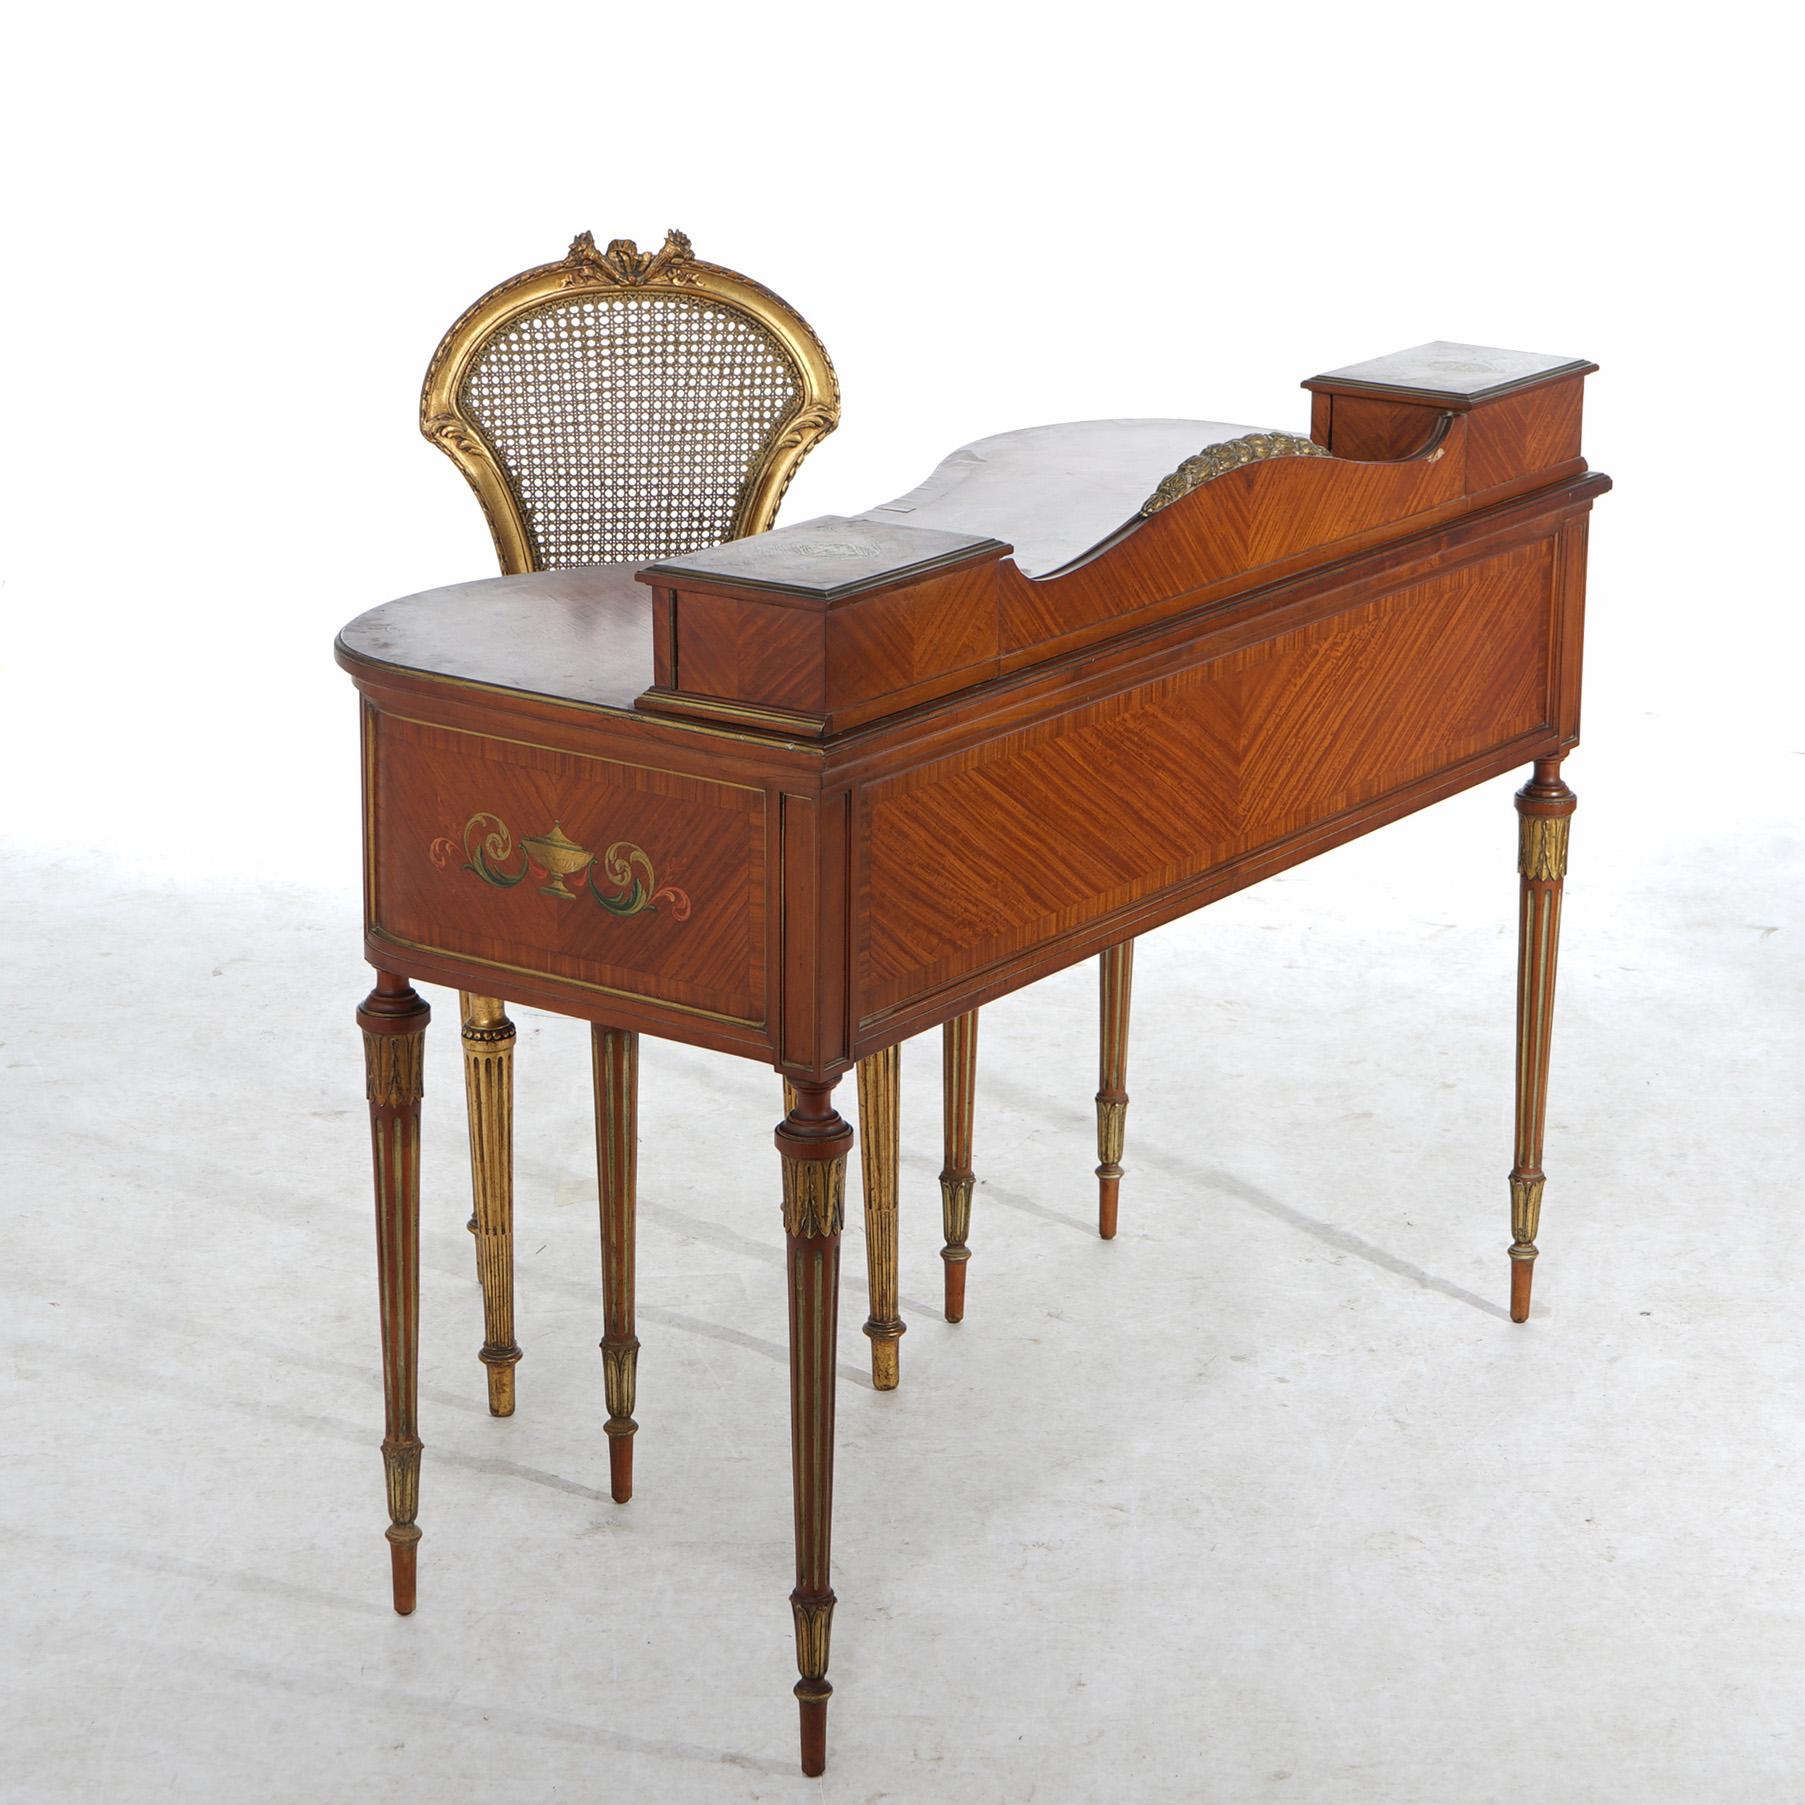 Antique French Style Adams Decorated Satinwood Vanity & Chair Circa 1900 31